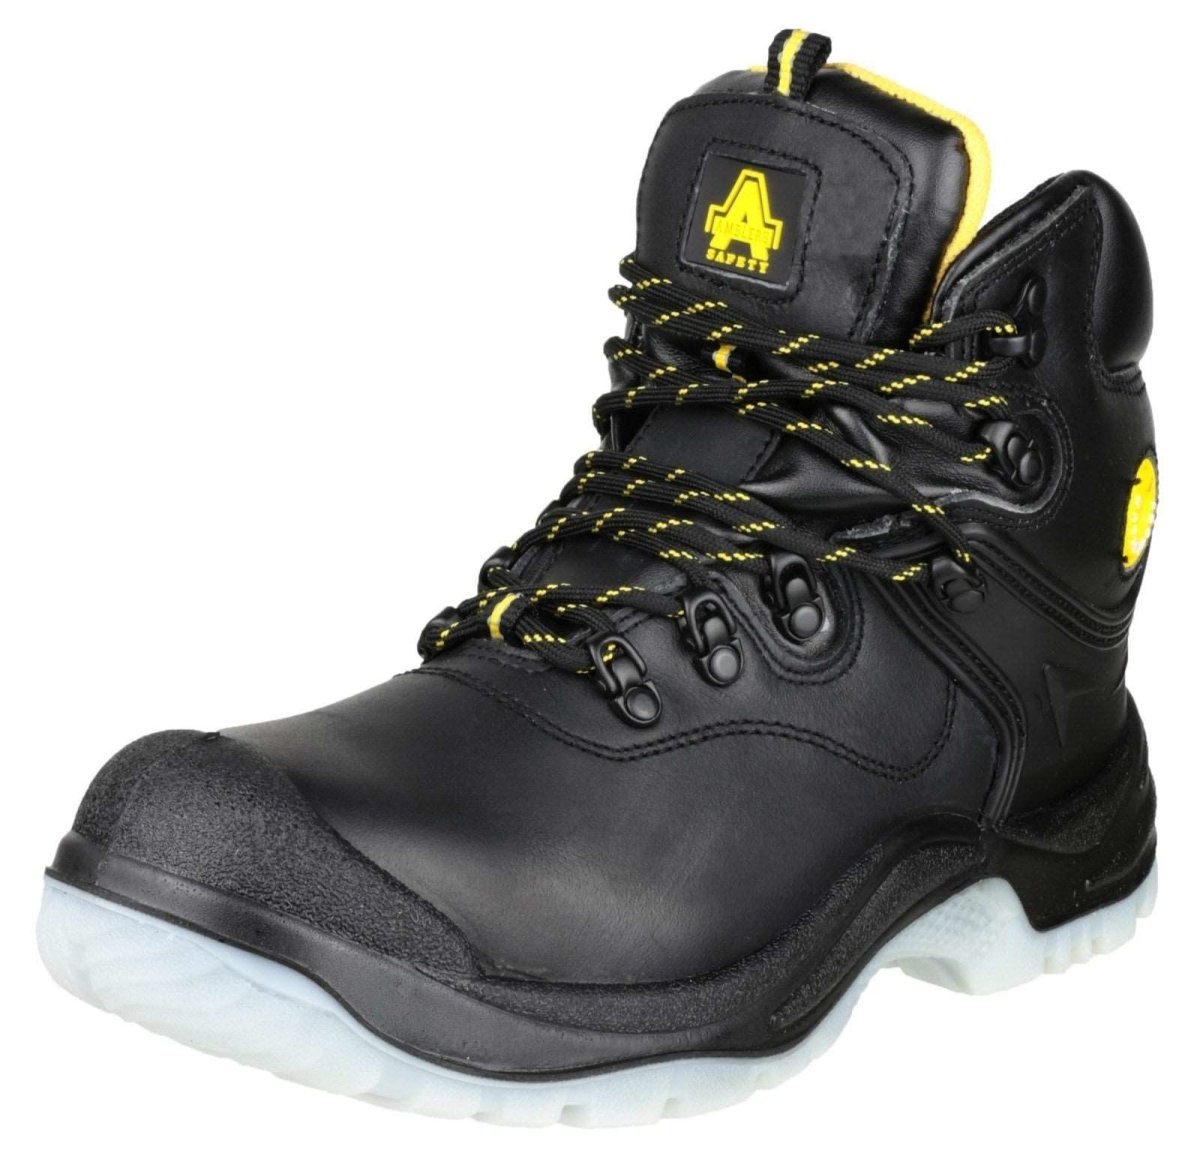 Amblers FS198 Waterproof Safety Boots - Shoe Store Direct